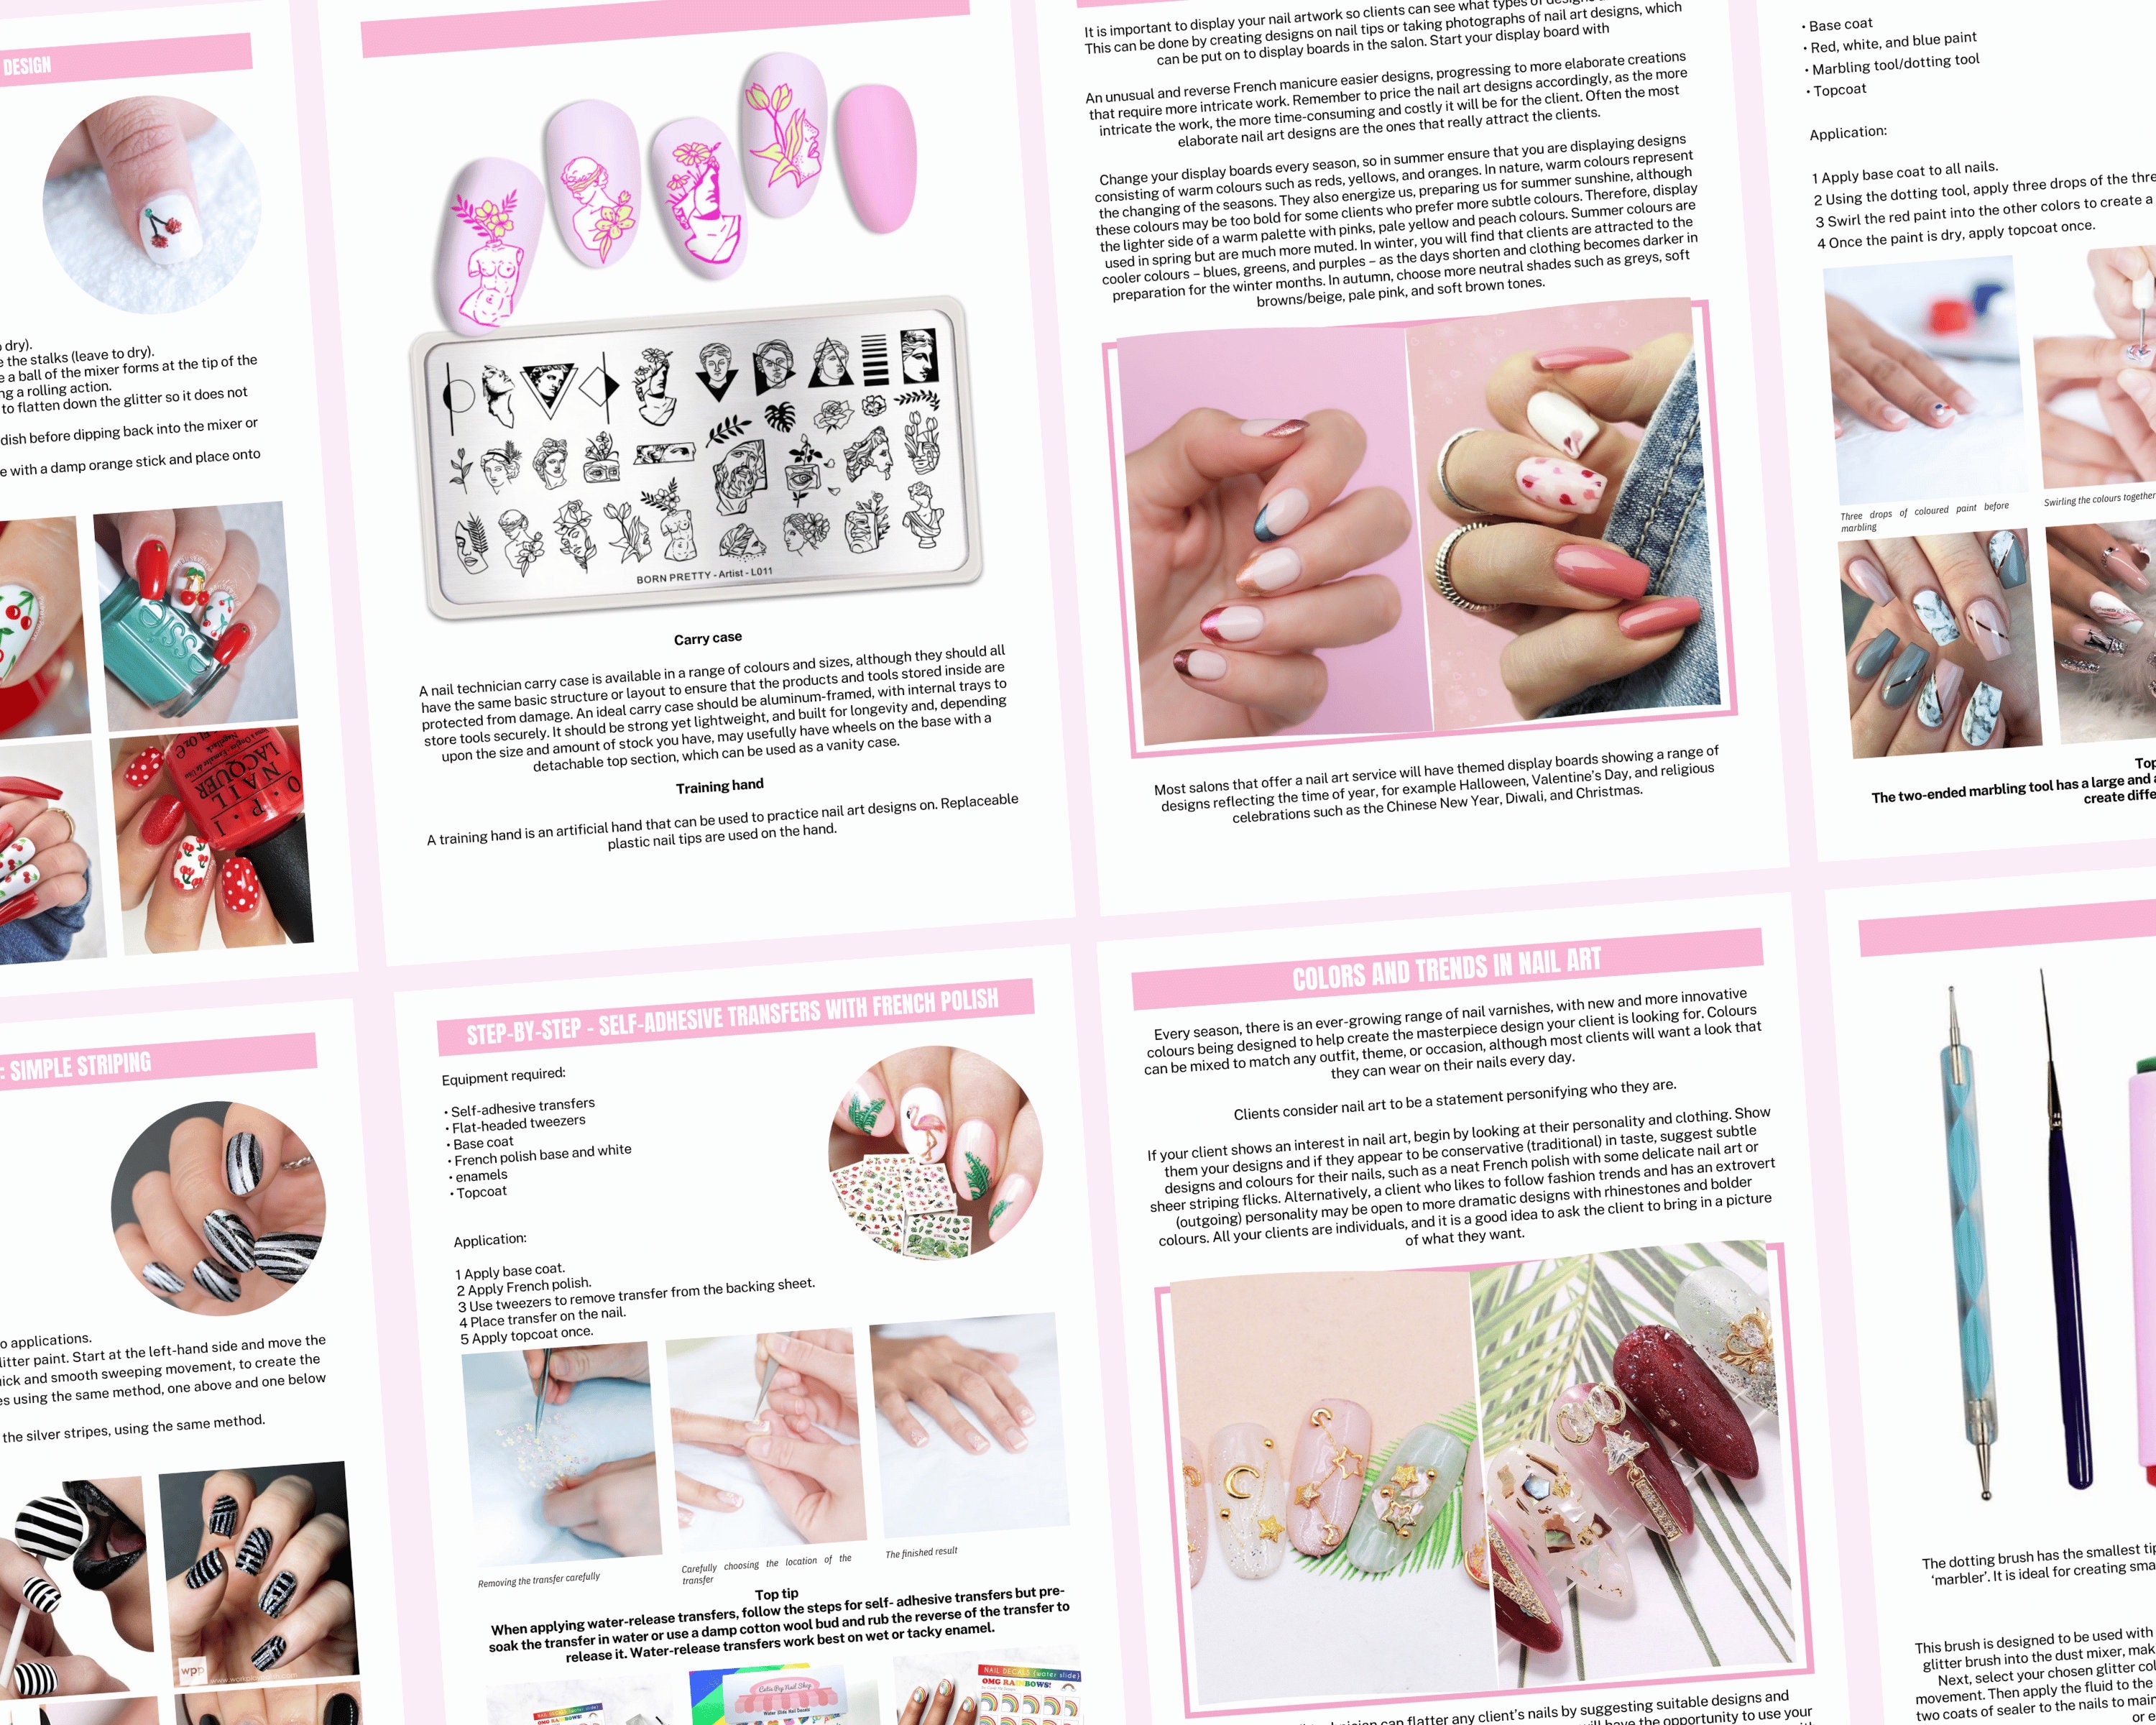 Create your own Nail Art | Miseducated